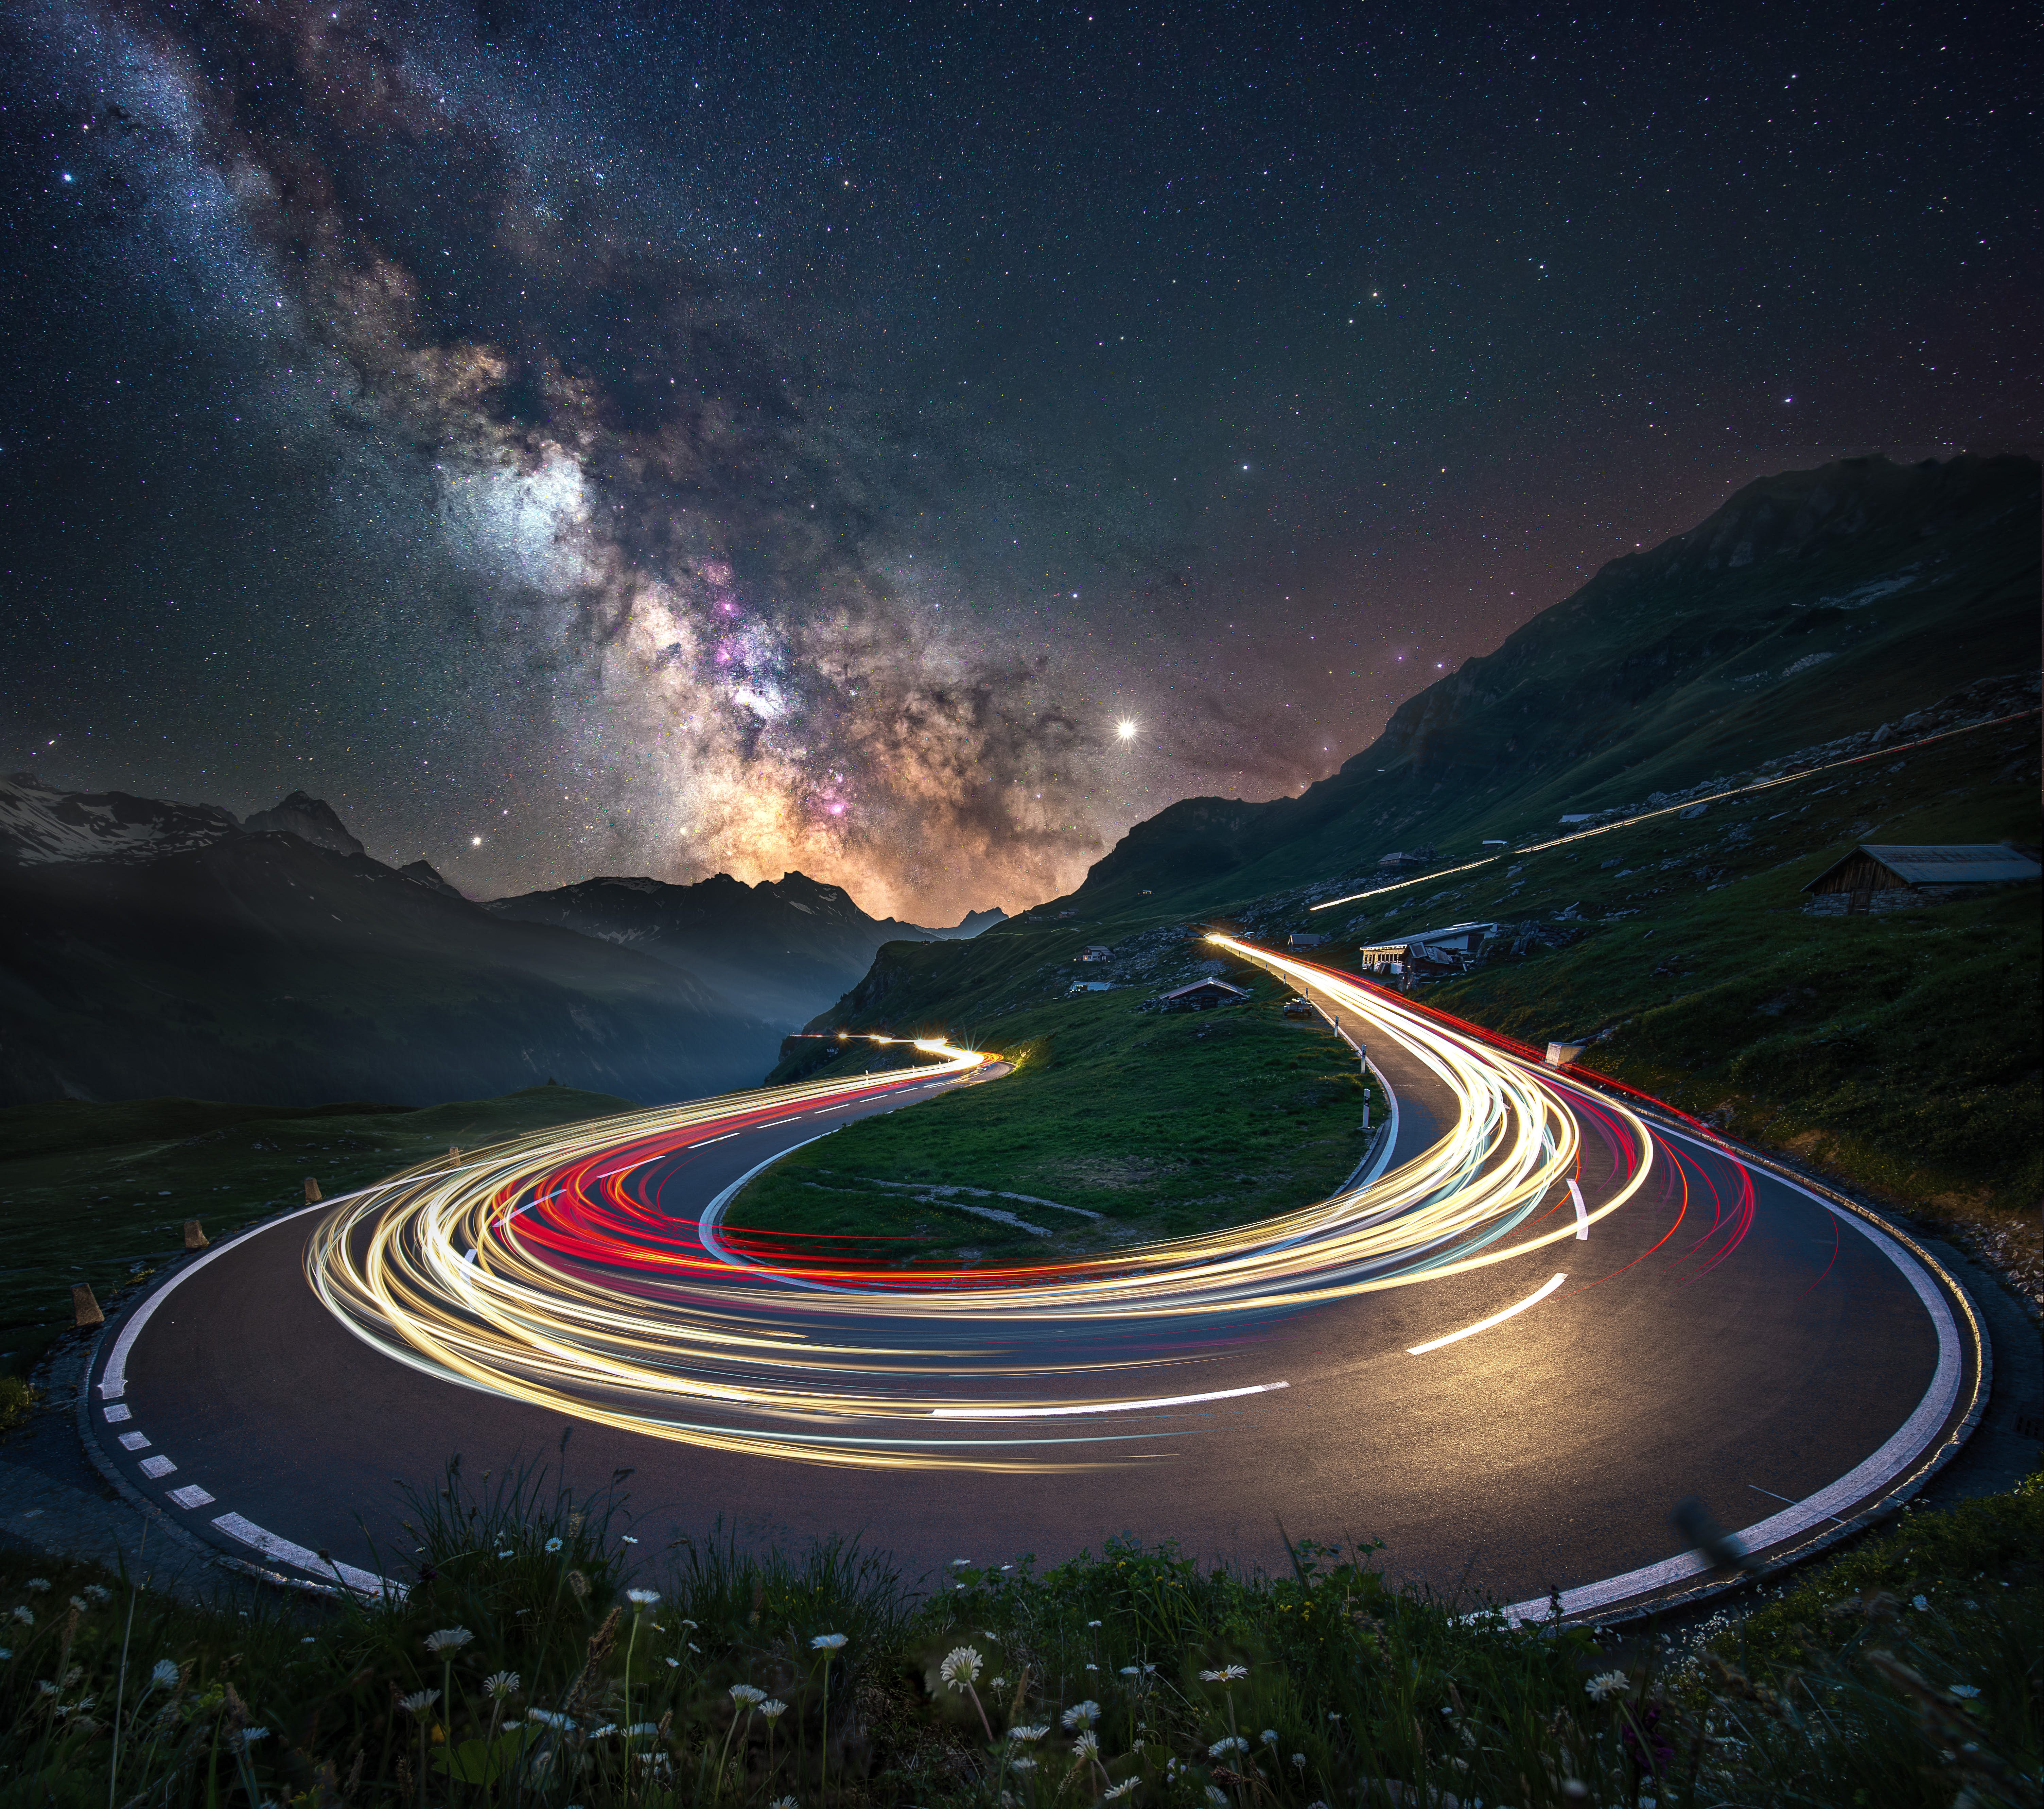 Mountain Nature Night Road Wallpapers